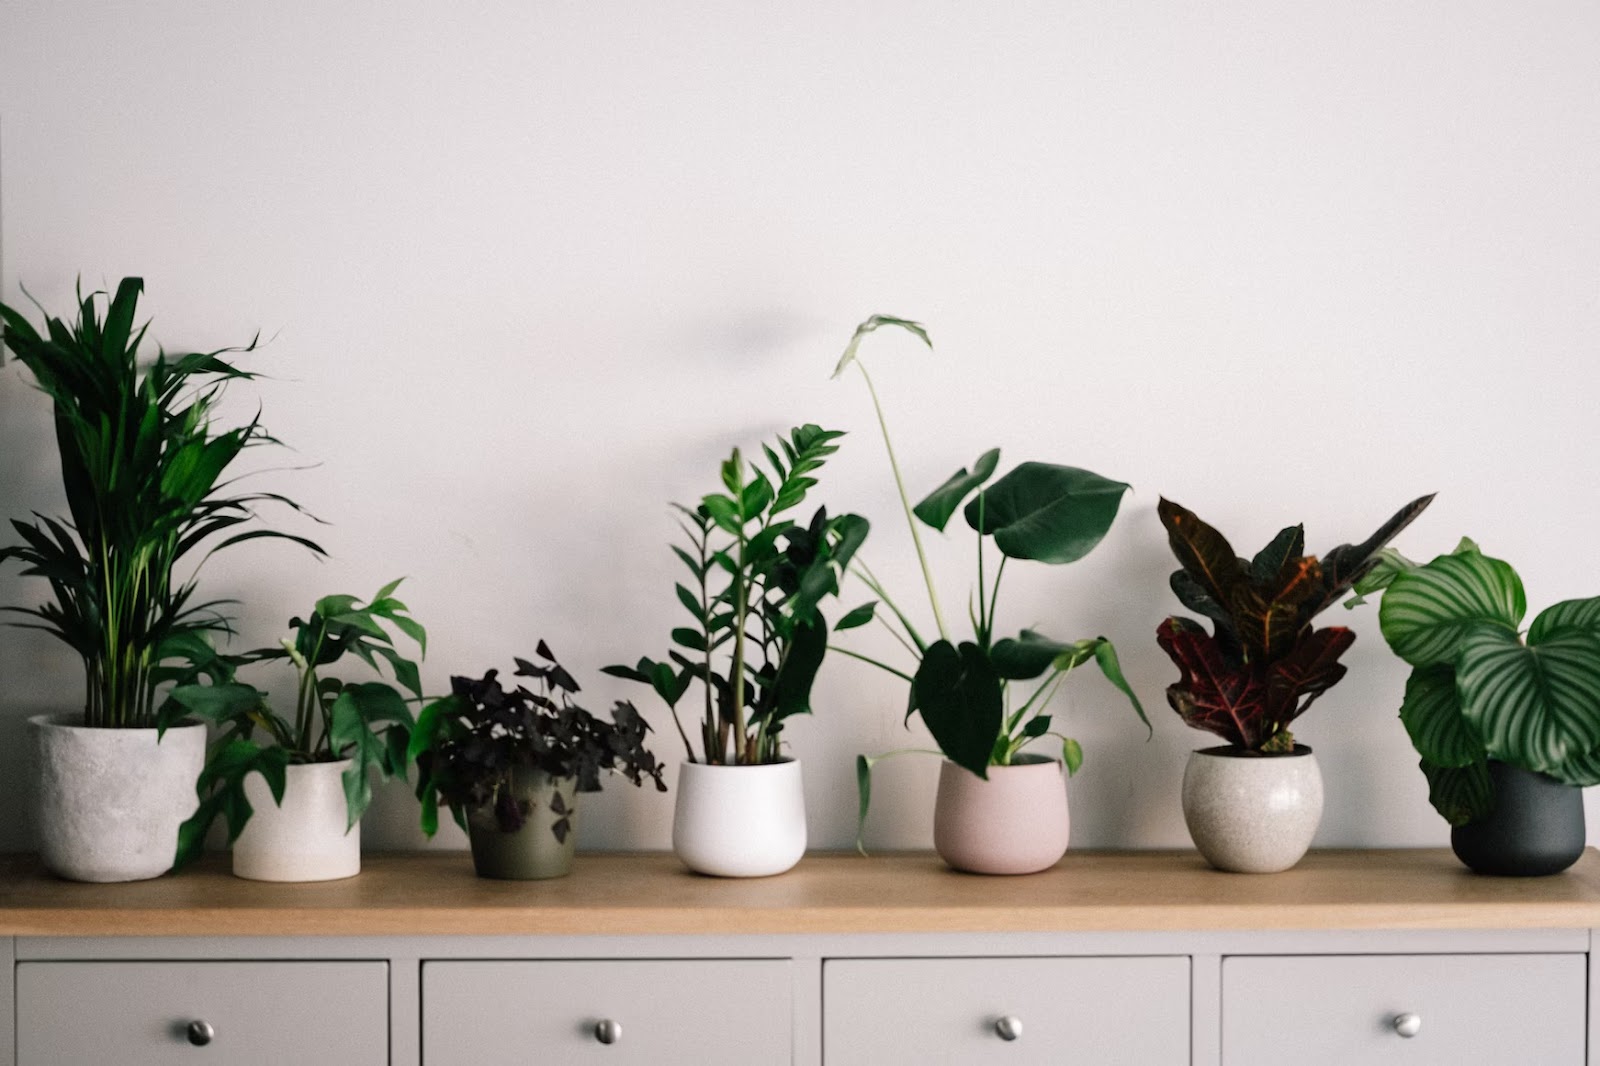 Houseplants - How to Increase Humidity in a Room